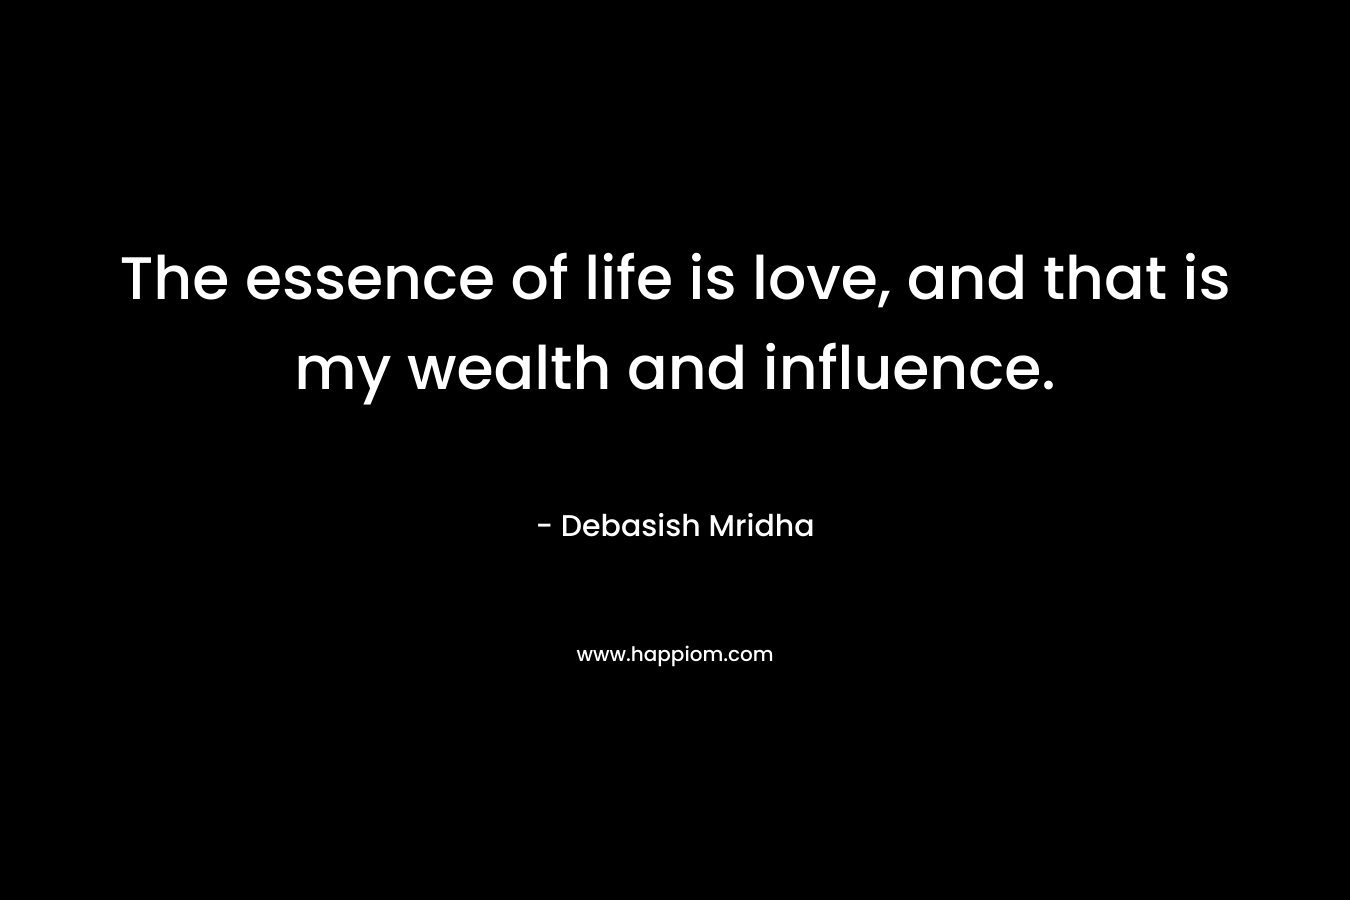 The essence of life is love, and that is my wealth and influence.